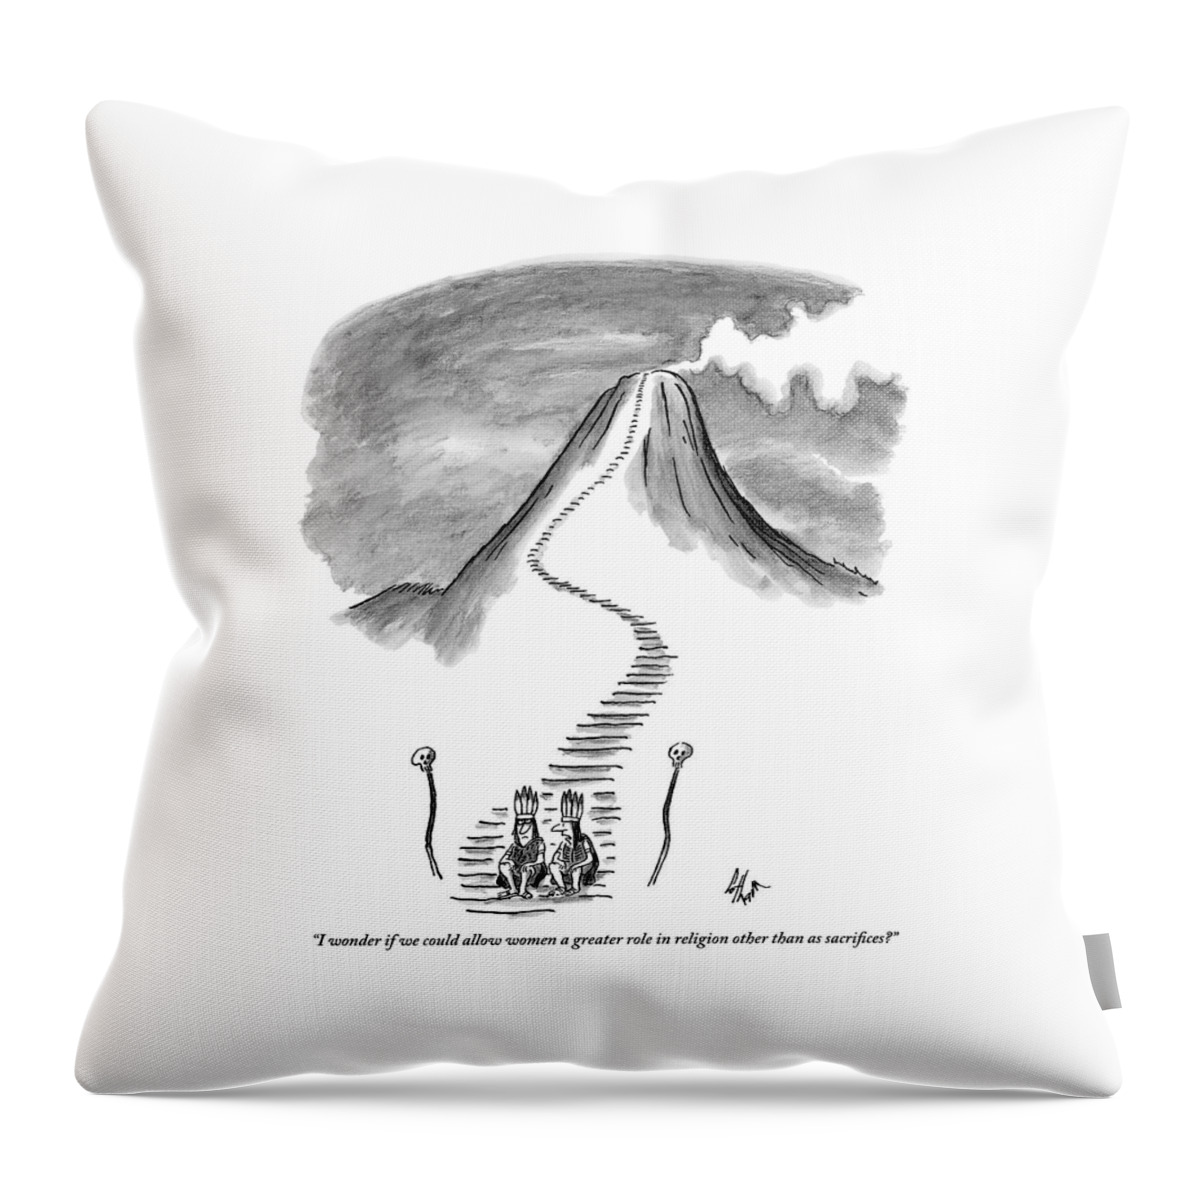 Two Tribesmen With Feather Headdresses Sit Throw Pillow